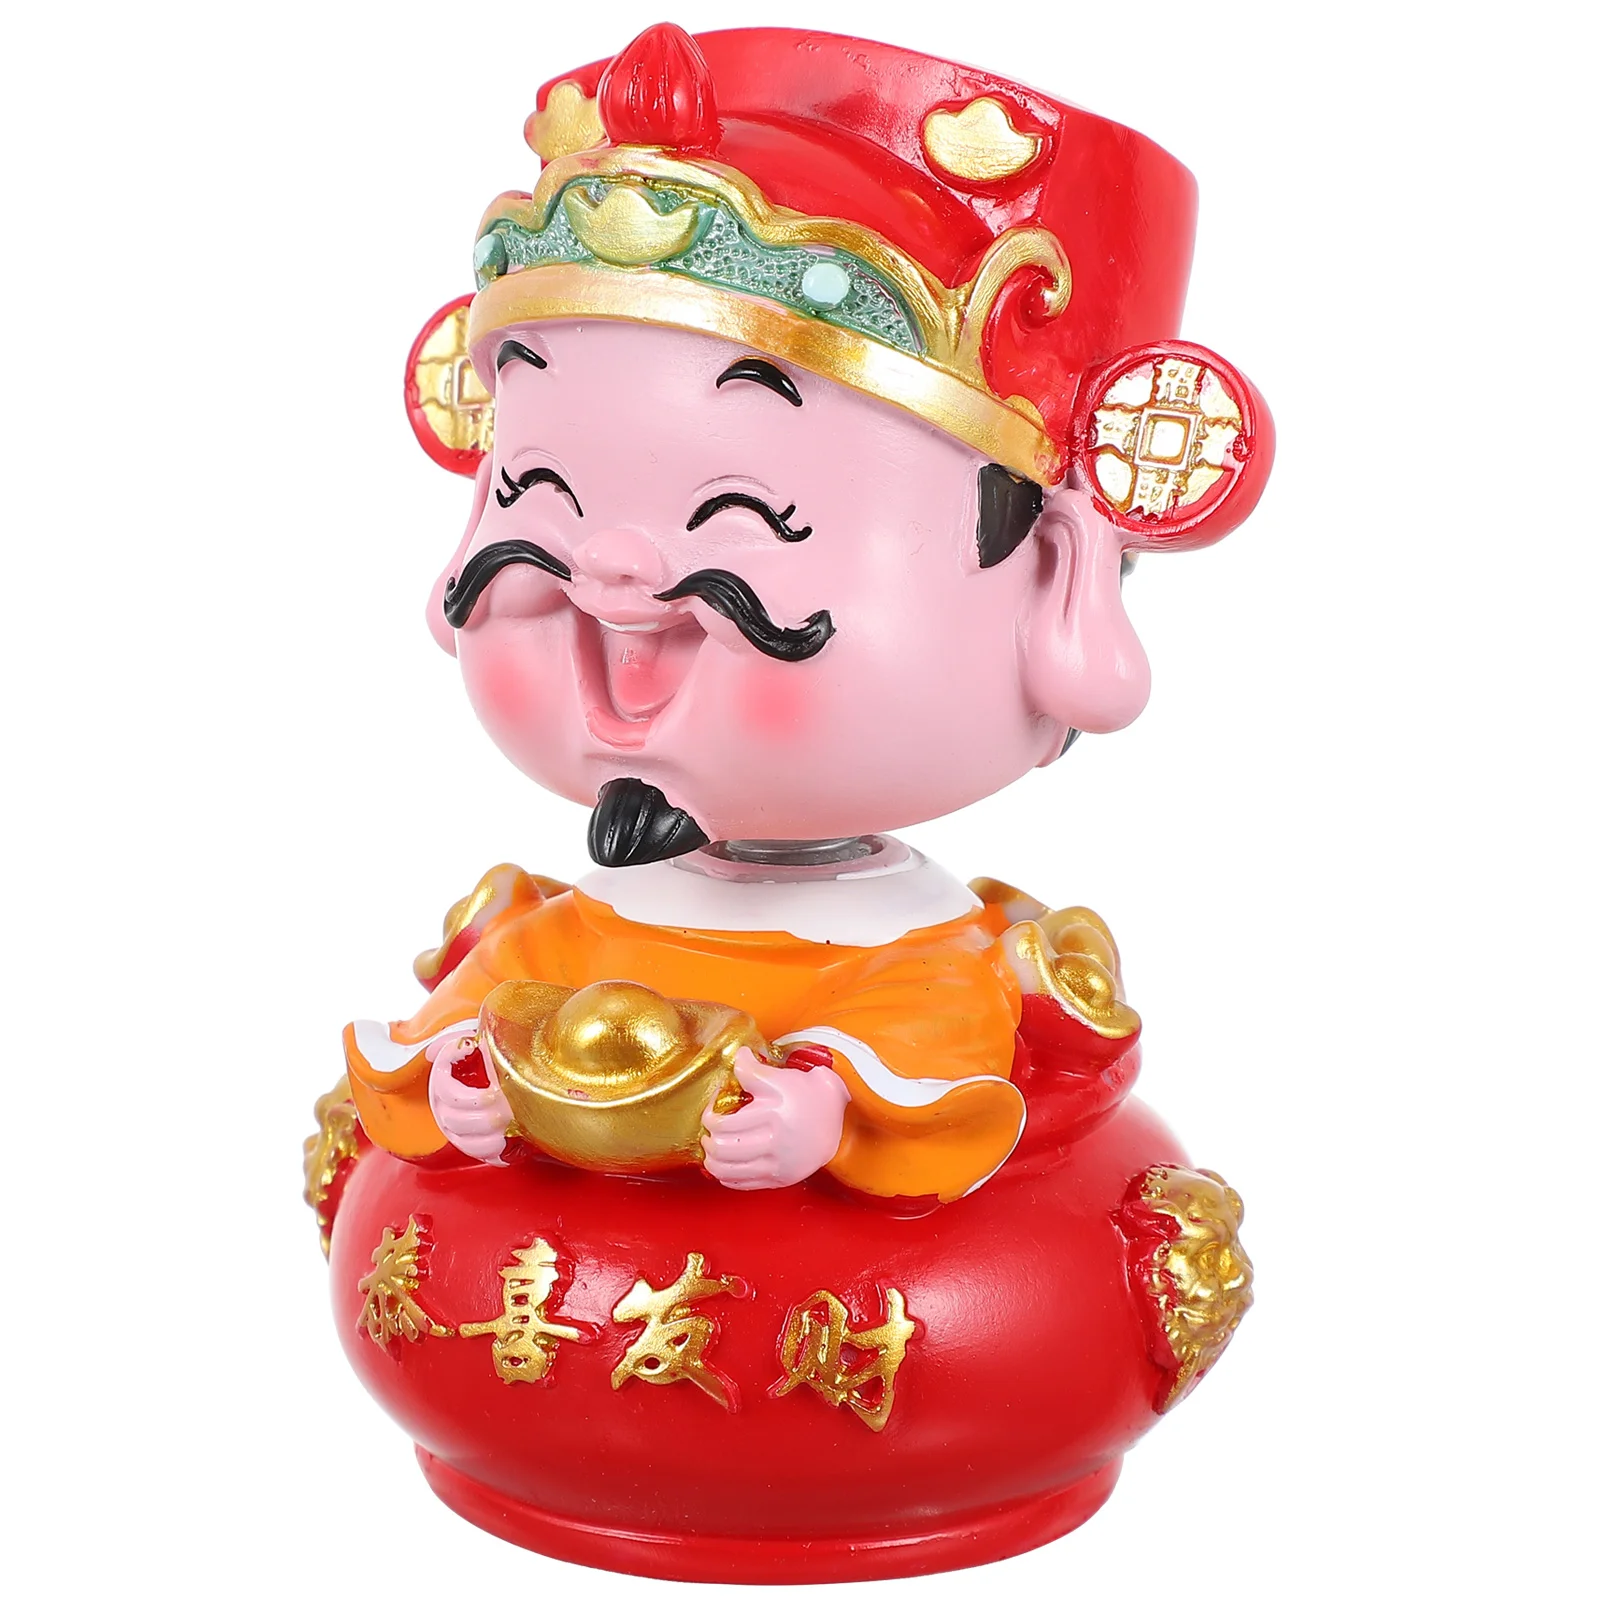 

Statue God Car Wealth Chinese Shui Feng Fortune Ornament Dashboard Decor Decorations Shen Topper Decoration Figurine Cake Year